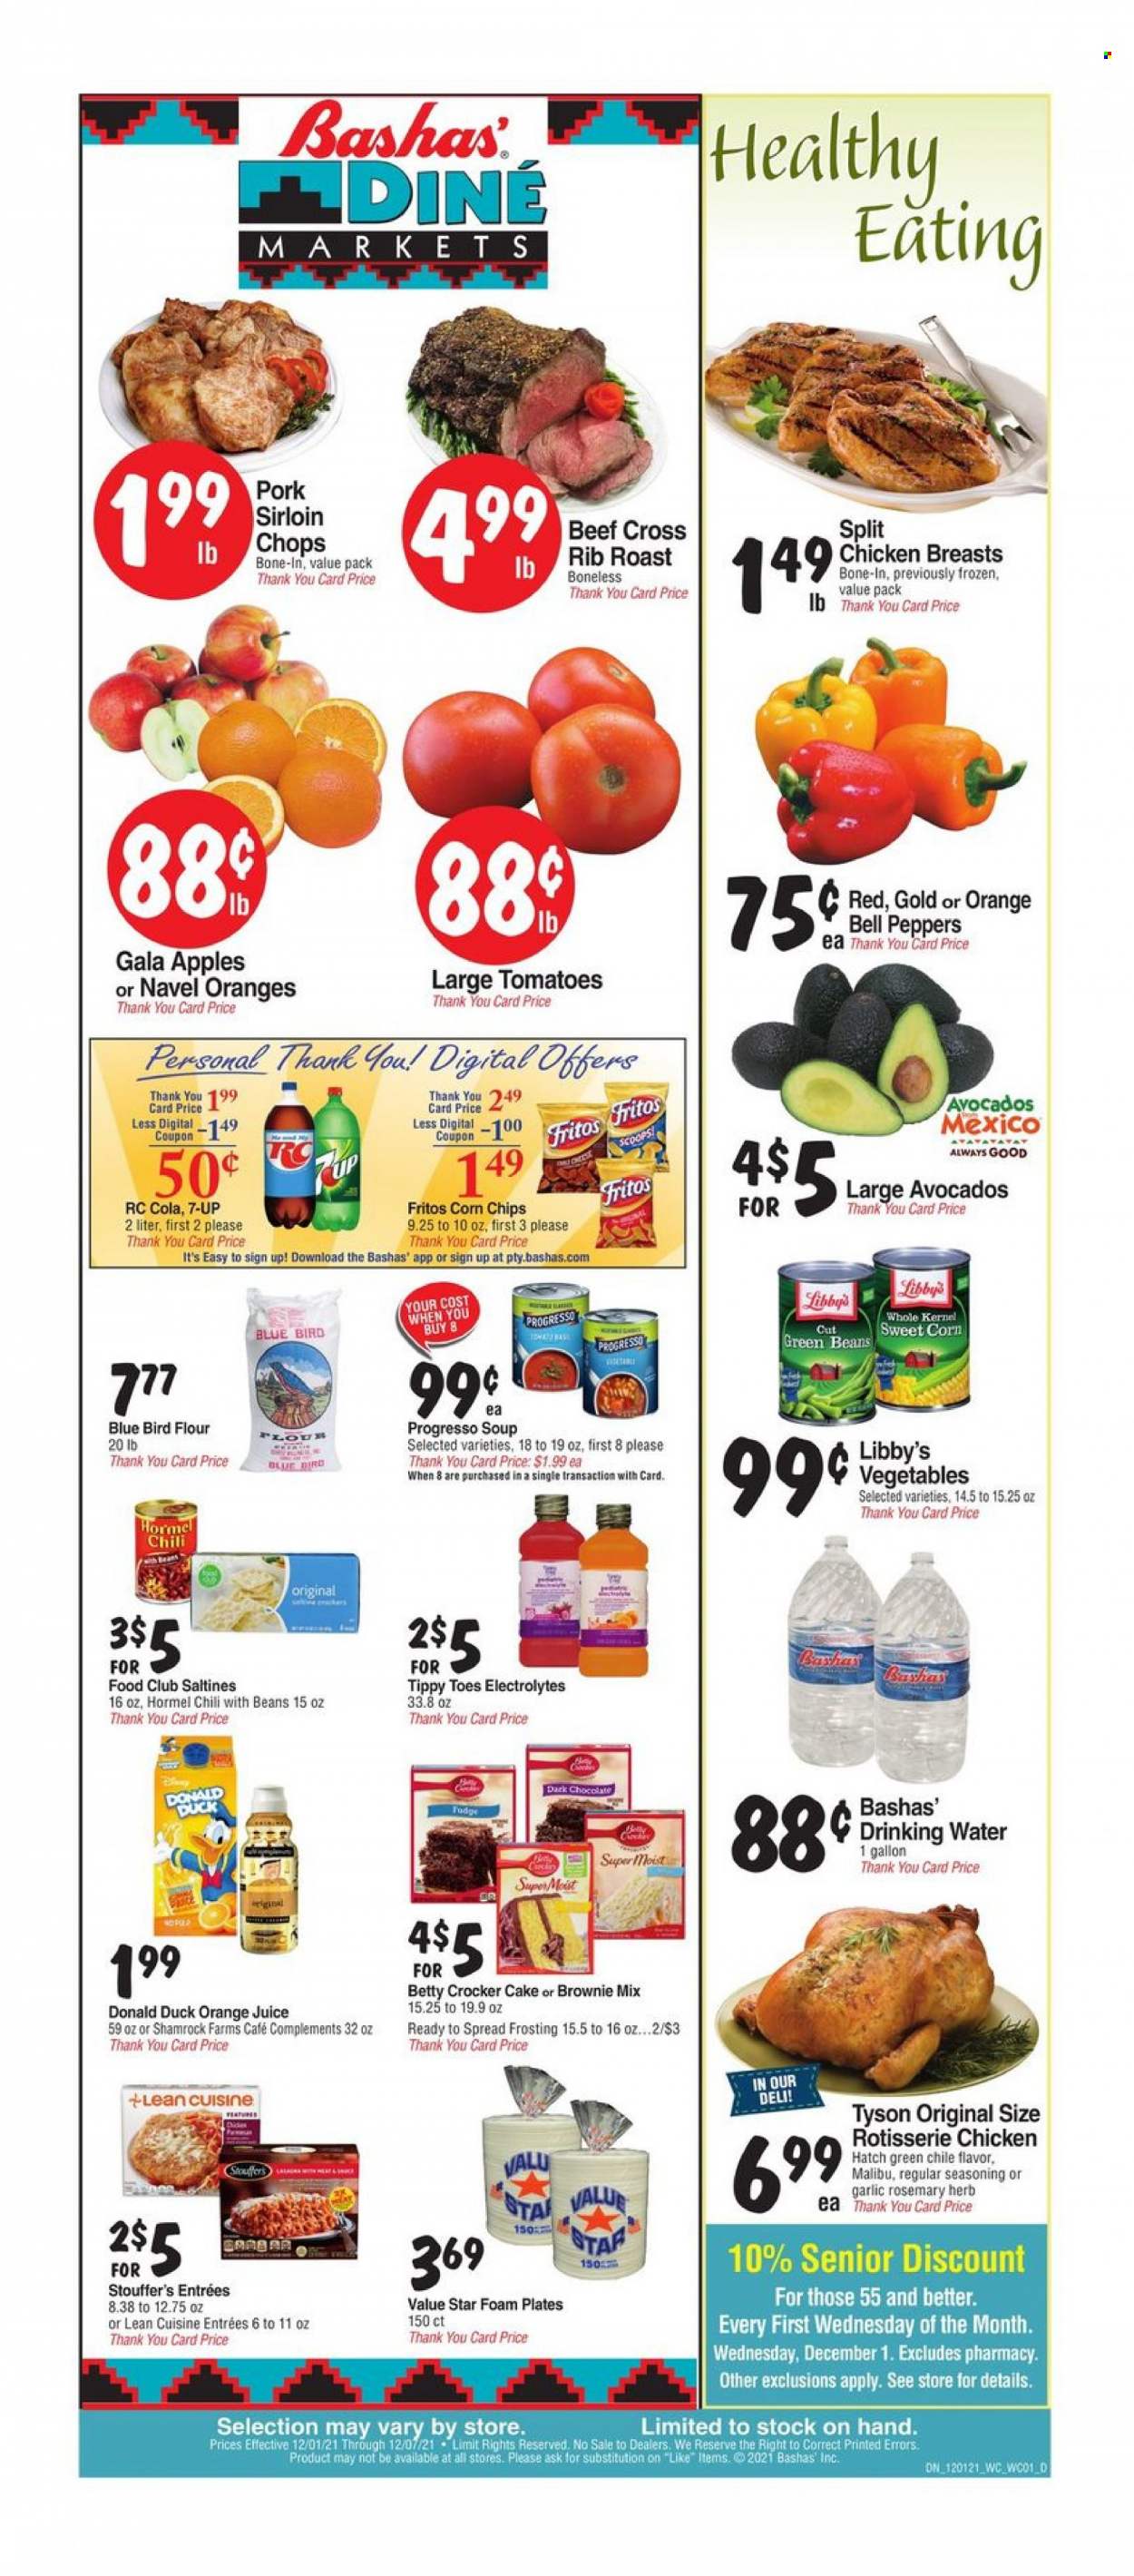 thumbnail - Bashas' Diné Markets Flyer - 12/01/2021 - 12/07/2021 - Sales products - cake, brownie mix, bell peppers, garlic, green beans, tomatoes, peppers, sweet corn, apples, avocado, Gala, chicken roast, Progresso, Lean Cuisine, Hormel, Stouffer's, fudge, chocolate, dark chocolate, Fritos, corn chips, saltines, flour, frosting, rosemary, spice, orange juice, juice, 7UP, Malibu, chicken breasts, pork loin, navel oranges. Page 1.